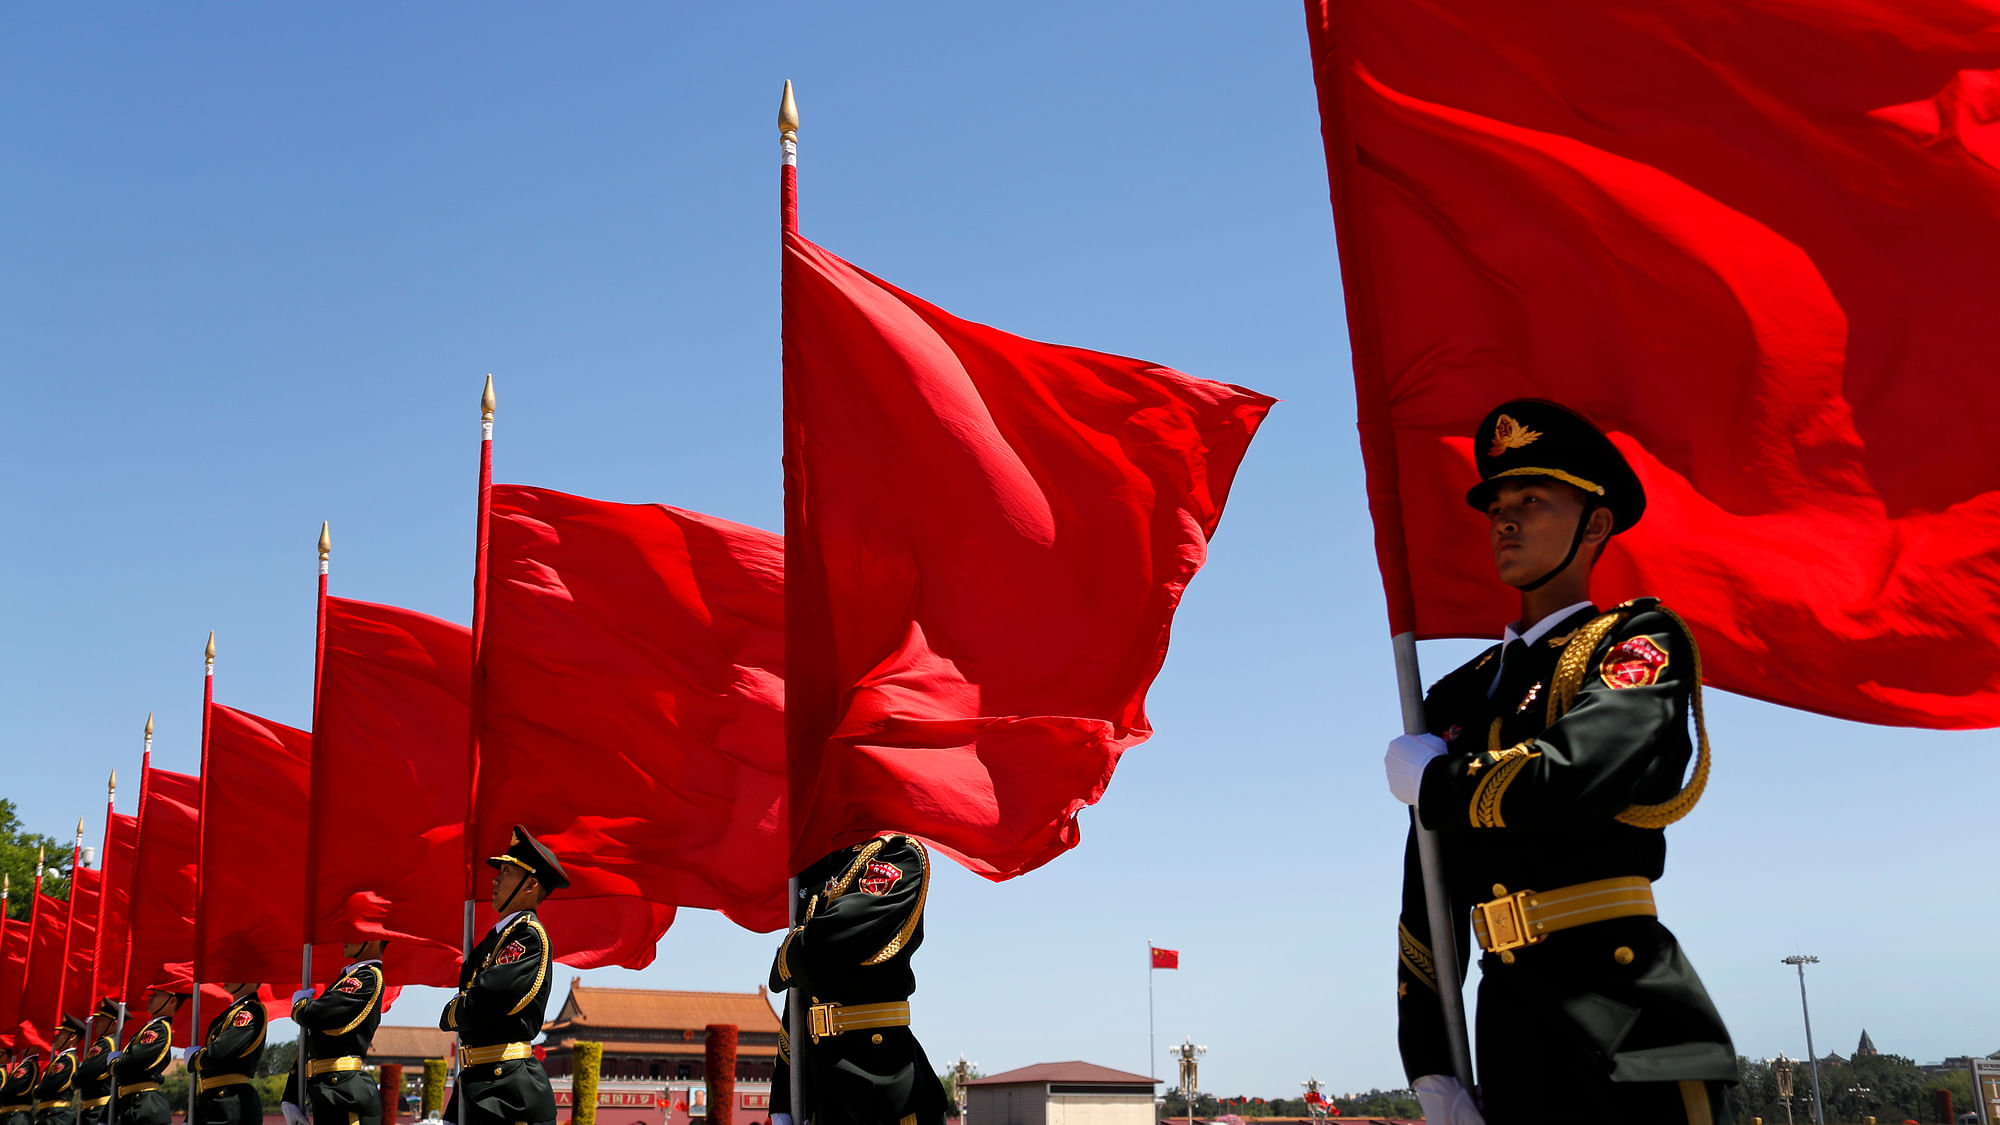 Members of the honour guard hold red flags as they wait for the arrival of VIPs during a welcome ceremony marking the the Belt and Road Forum outside the Great Hall of the People in Beijing, Saturday, 13 May 2017. (Photo: AP)<a></a>